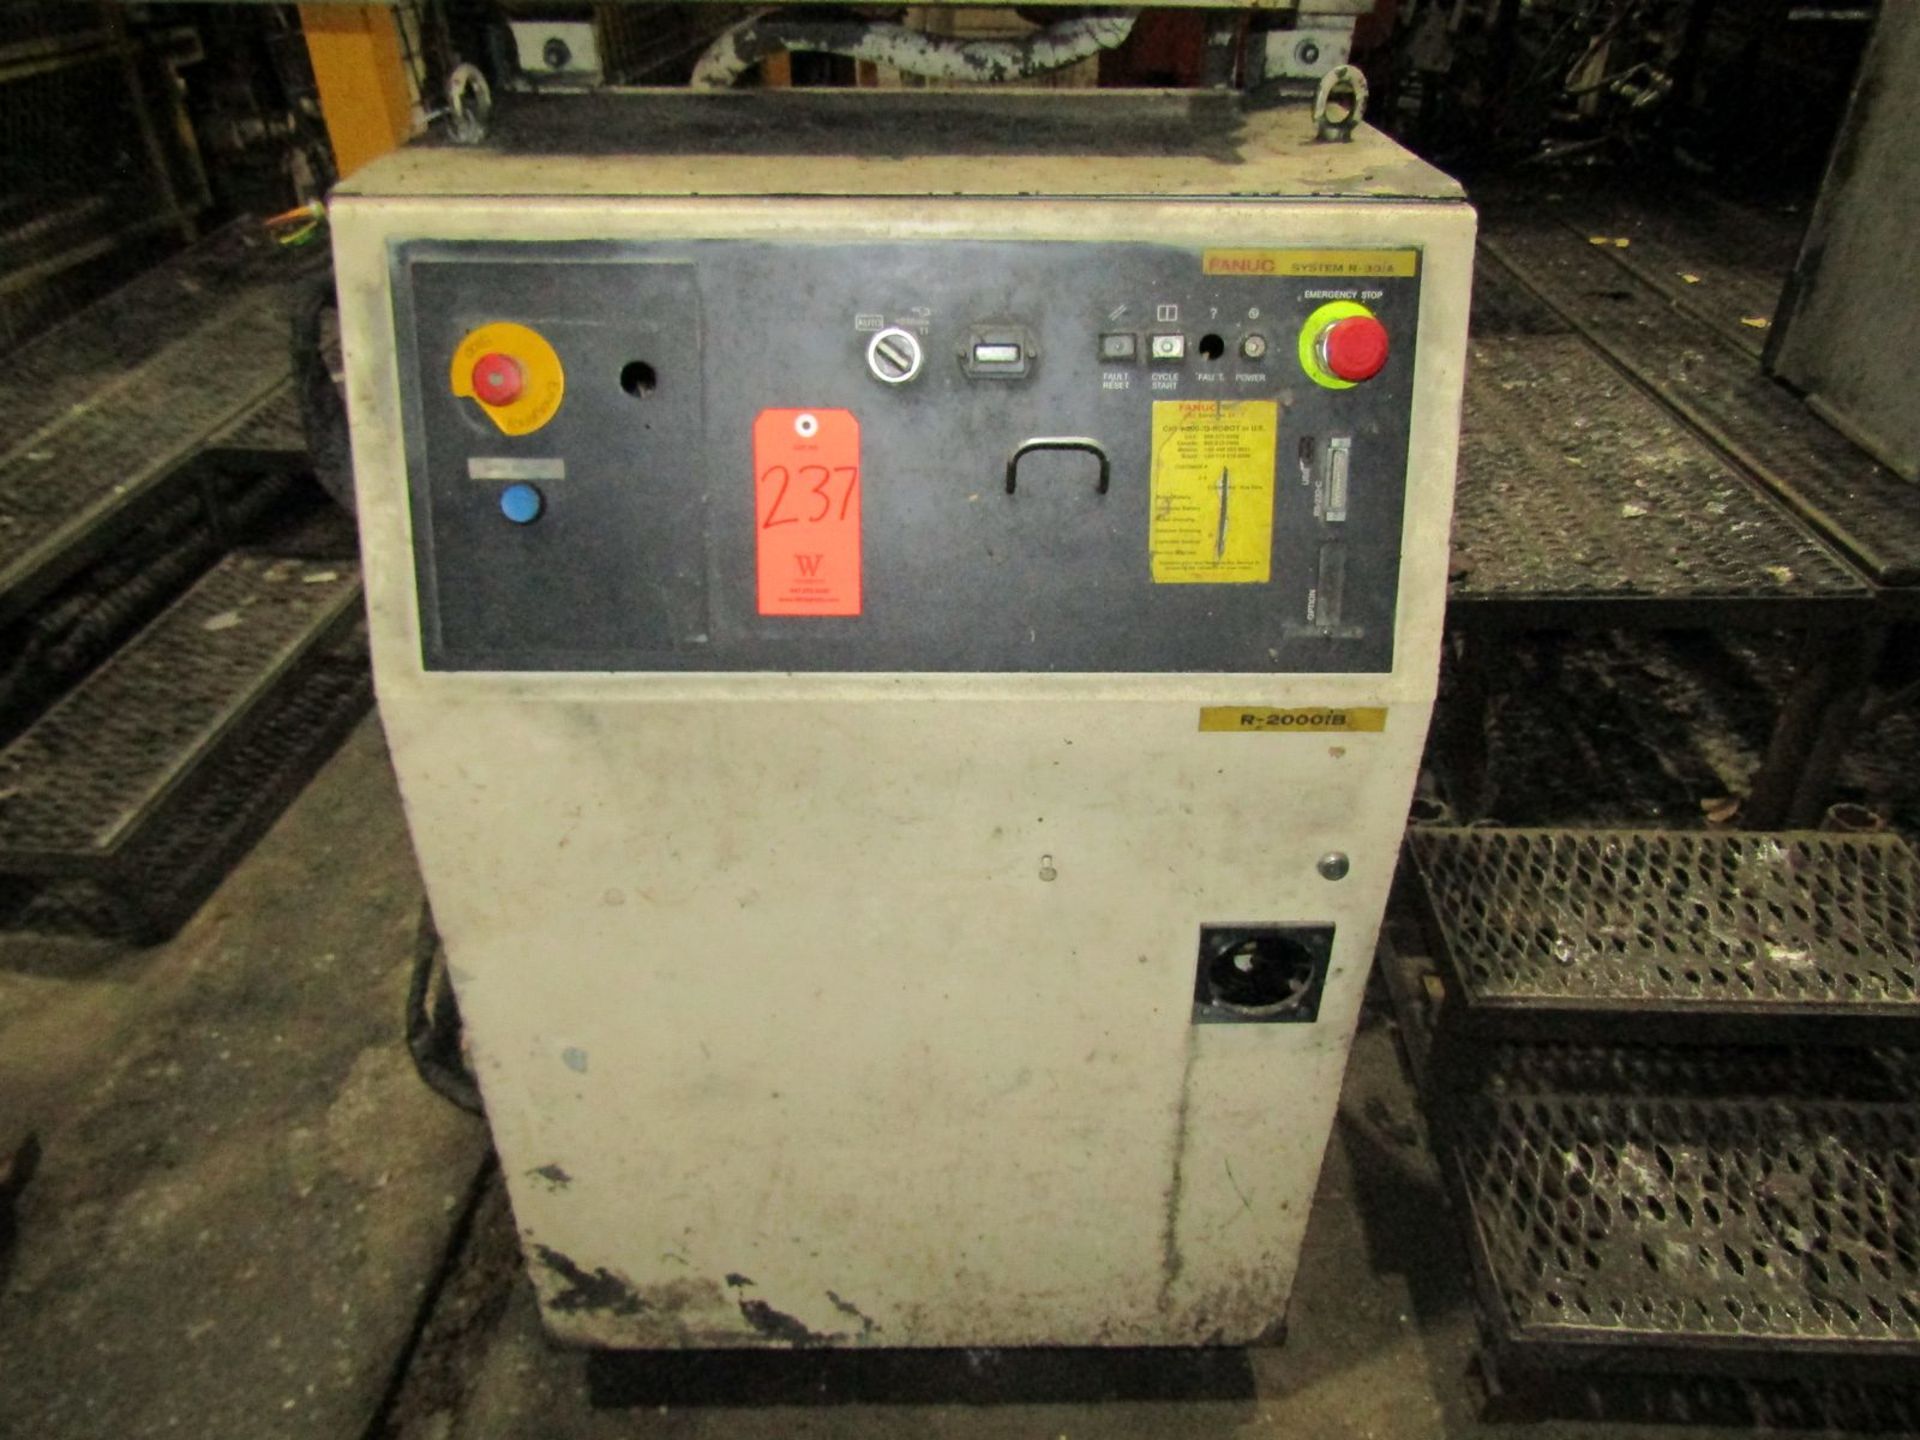 Fanuc Type A05B-1329-B201 Robot, S/N: R11902136 (2011); with Fanuc System R-30iA Controller & - Image 4 of 4